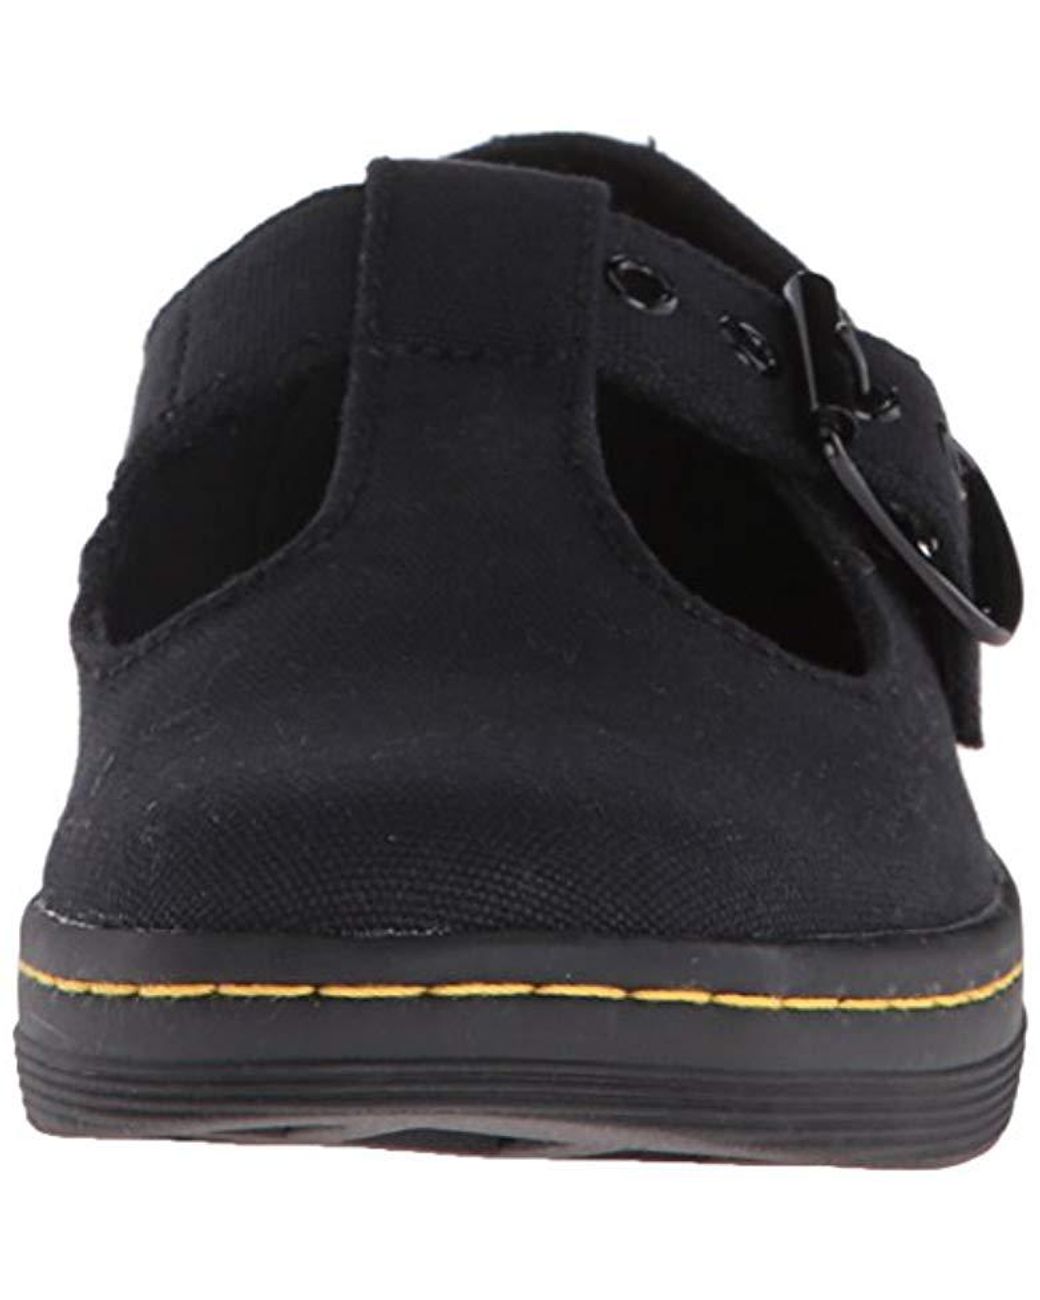 Dr. Martens Canvas Woolwich Mary Jane Flat in Black | Lyst